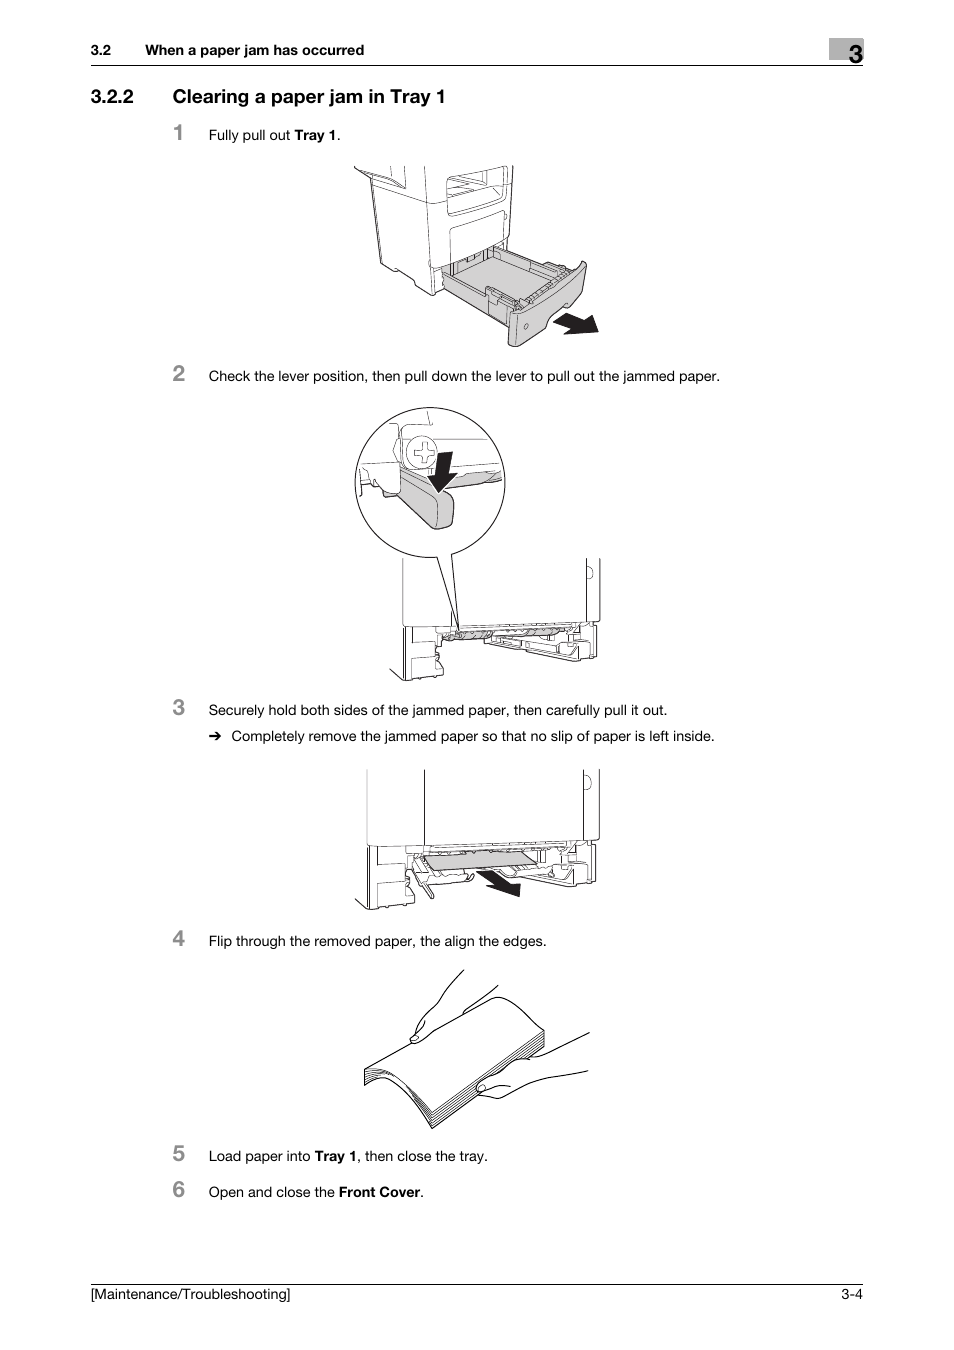 2 clearing a paper jam in tray 1, Clearing a paper jam in tray 1 -4 | Konica Minolta bizhub 4050 User Manual | Page 21 / 56